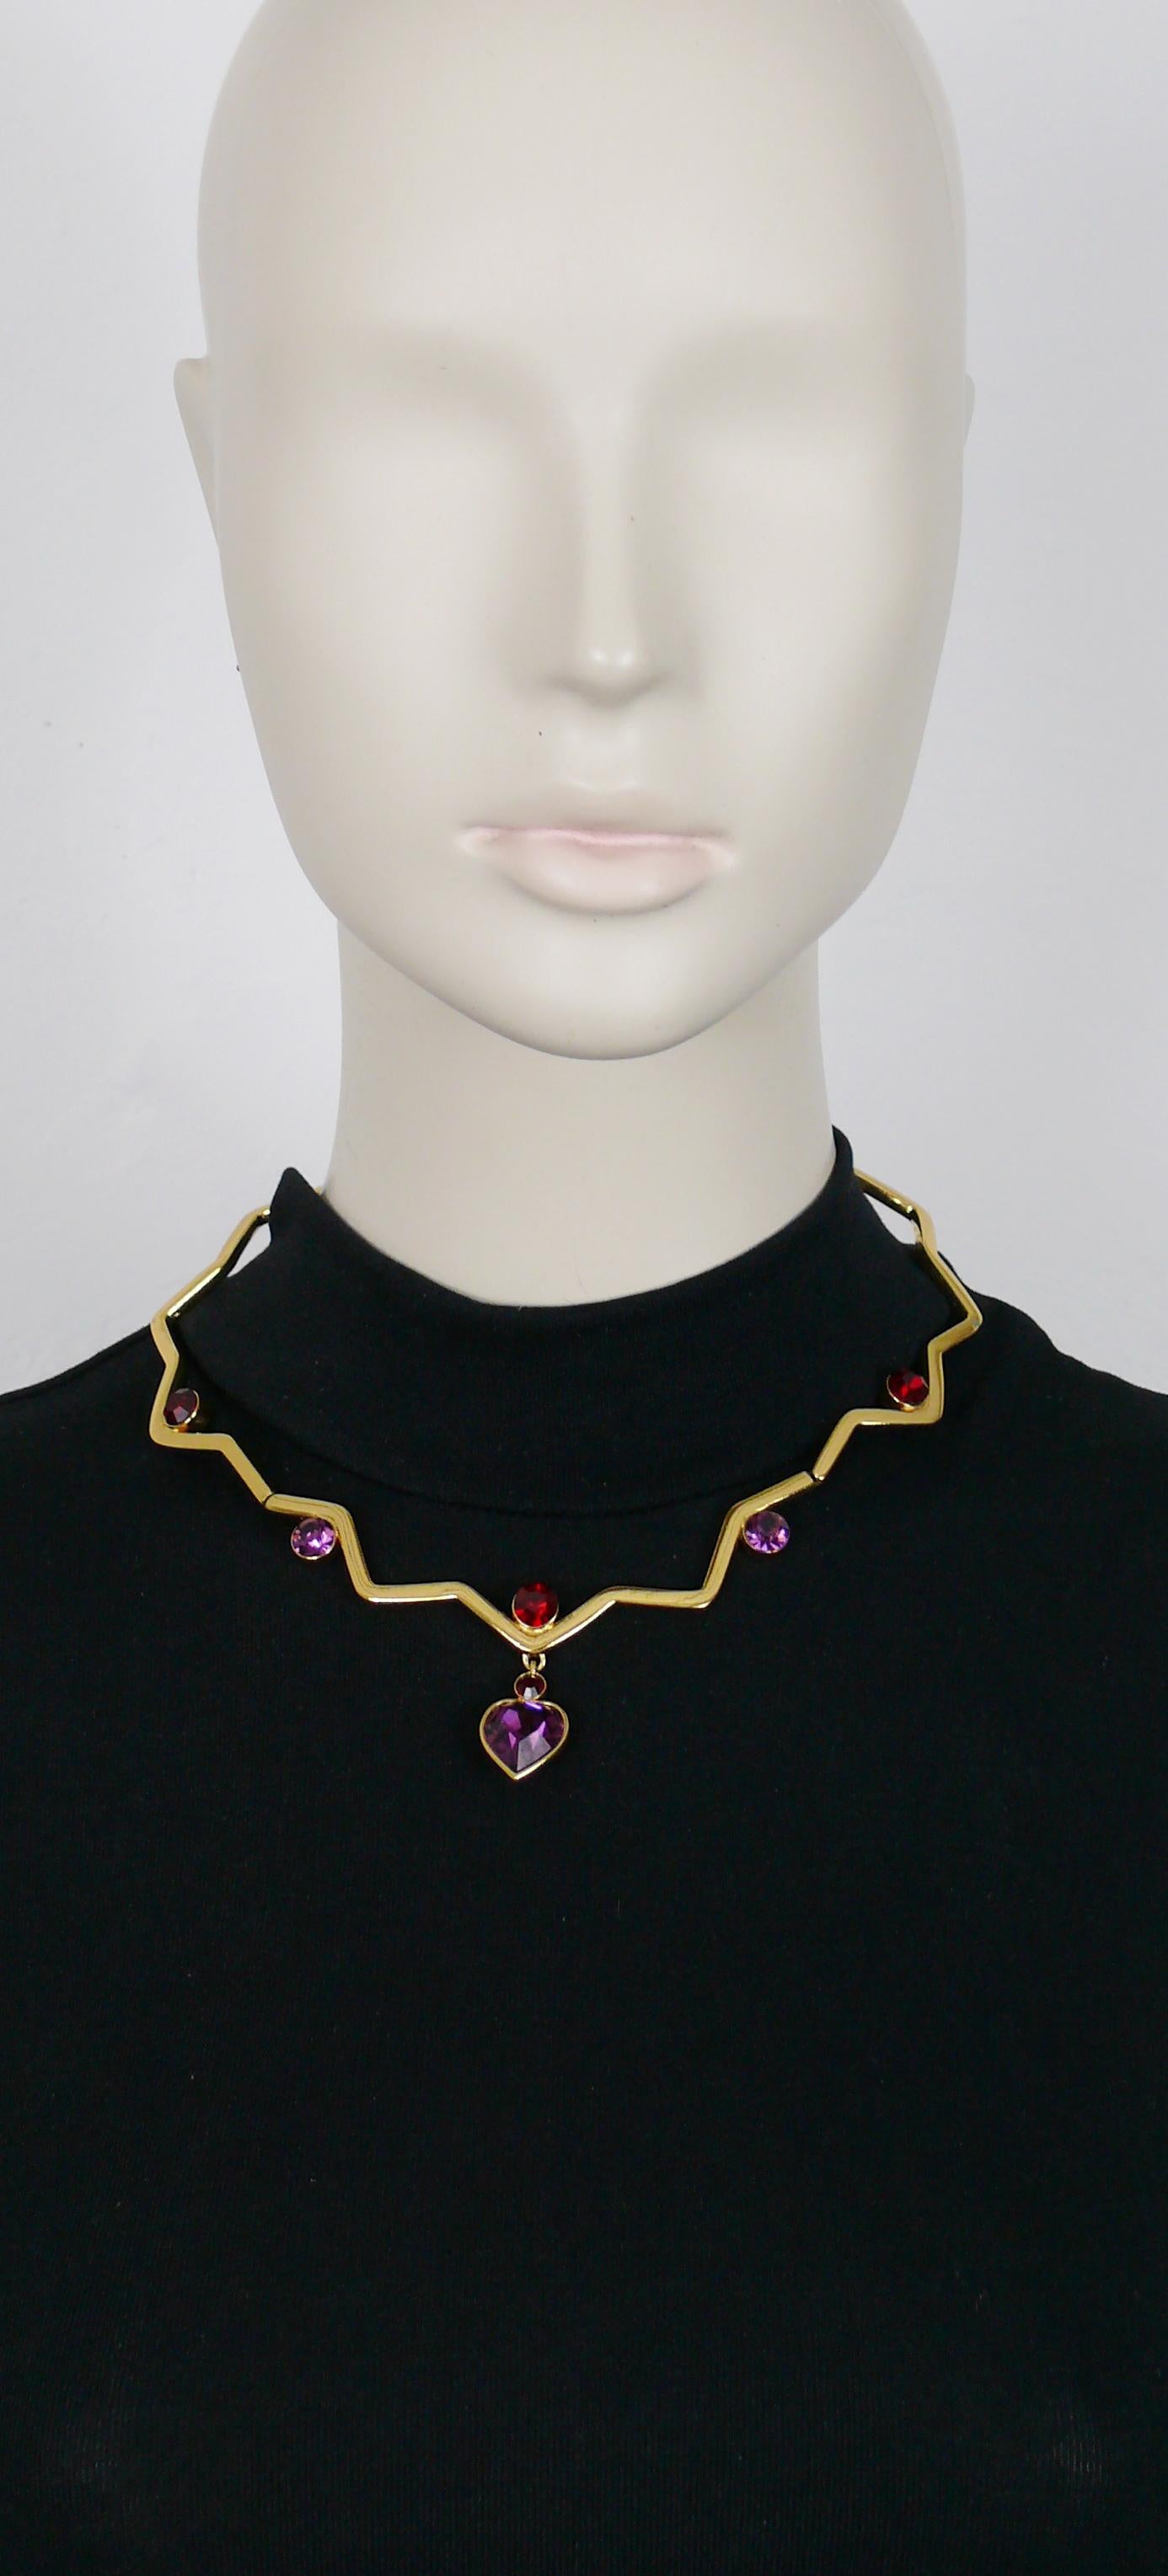 YVES SAINT LAURENT vintage gold toned articulated zig zag design necklace embellished with red and purple crystals, featuring a purple heart shaped crystal pendant.

T-bar and heart toggles closure.

Embossed YSL Made in France.
YVES SAINT LAURENT